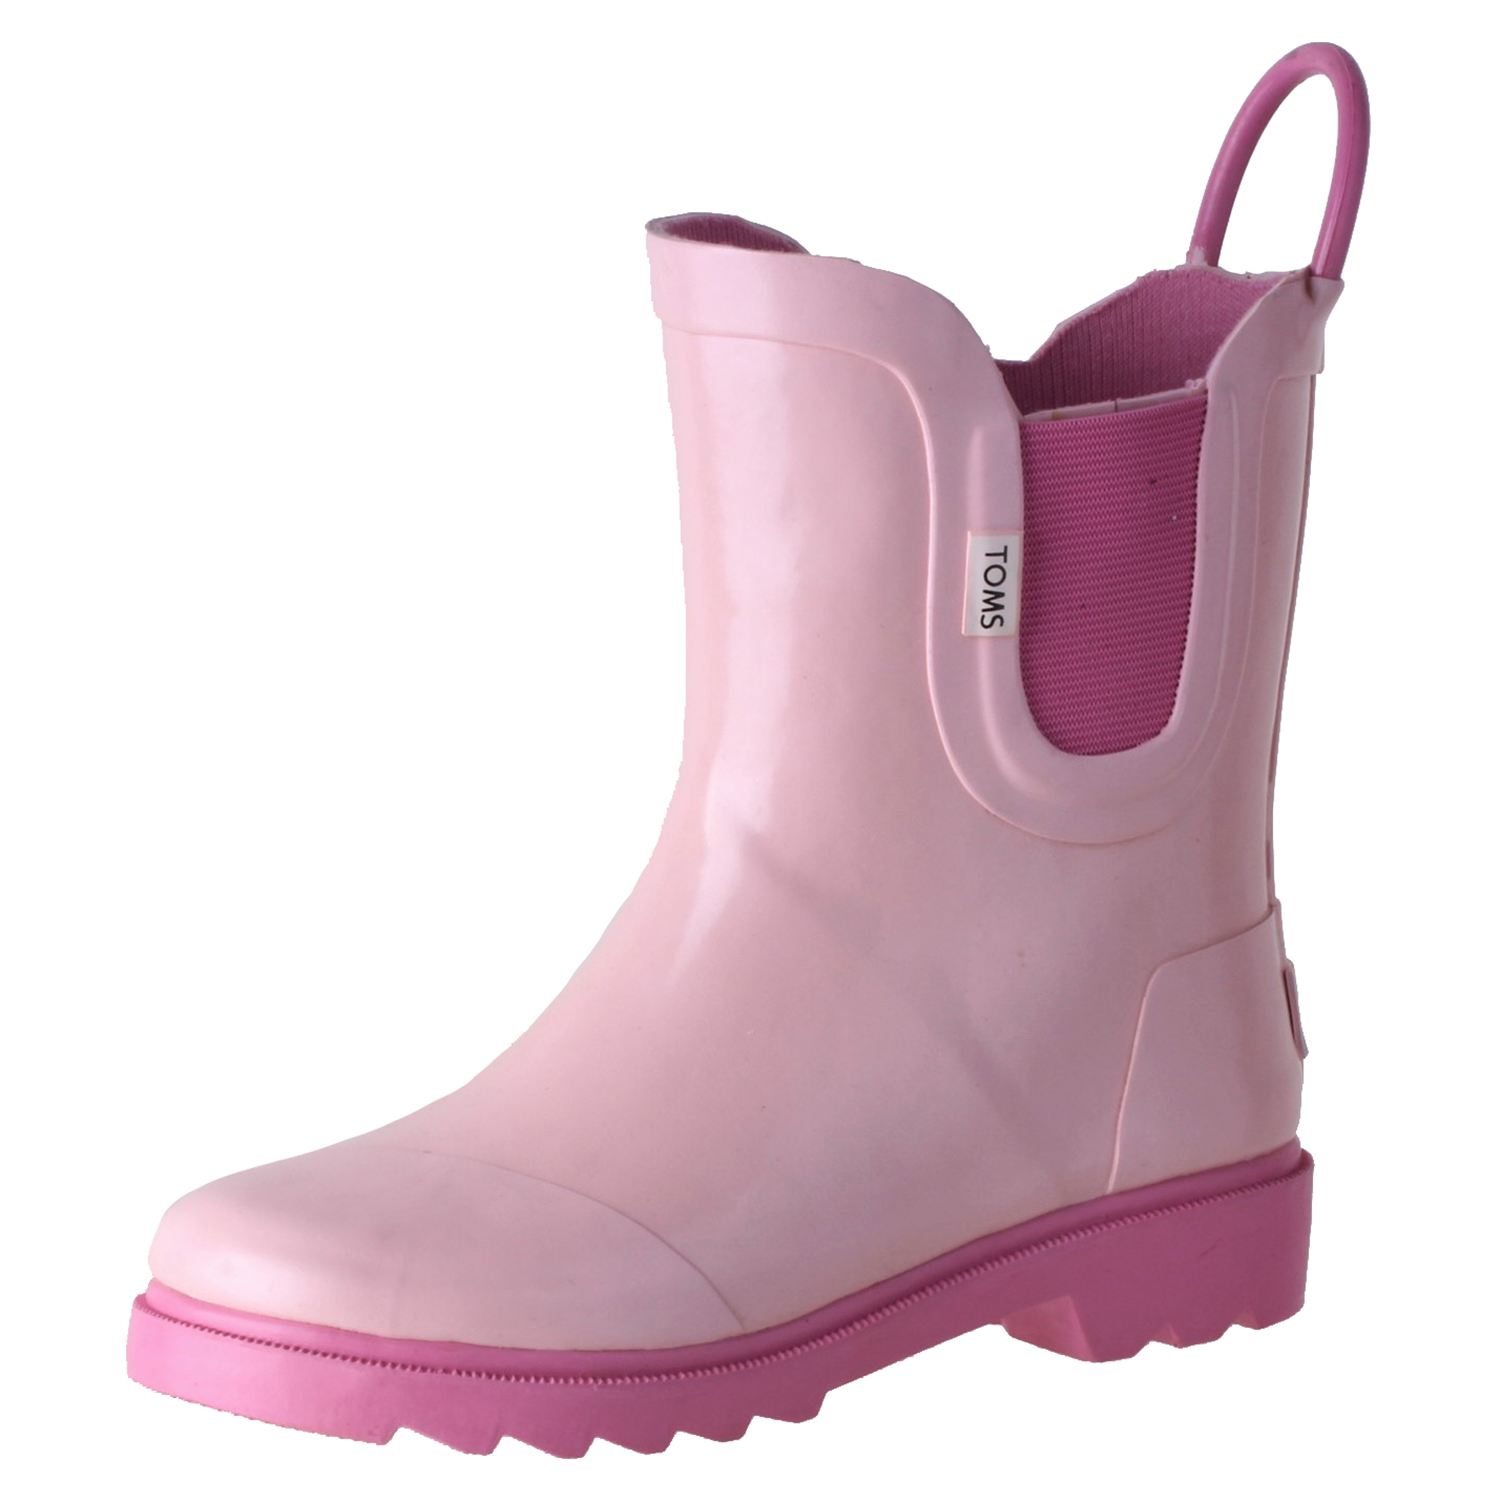 Toms Girls Rain Boot shoes Pink Rubber 